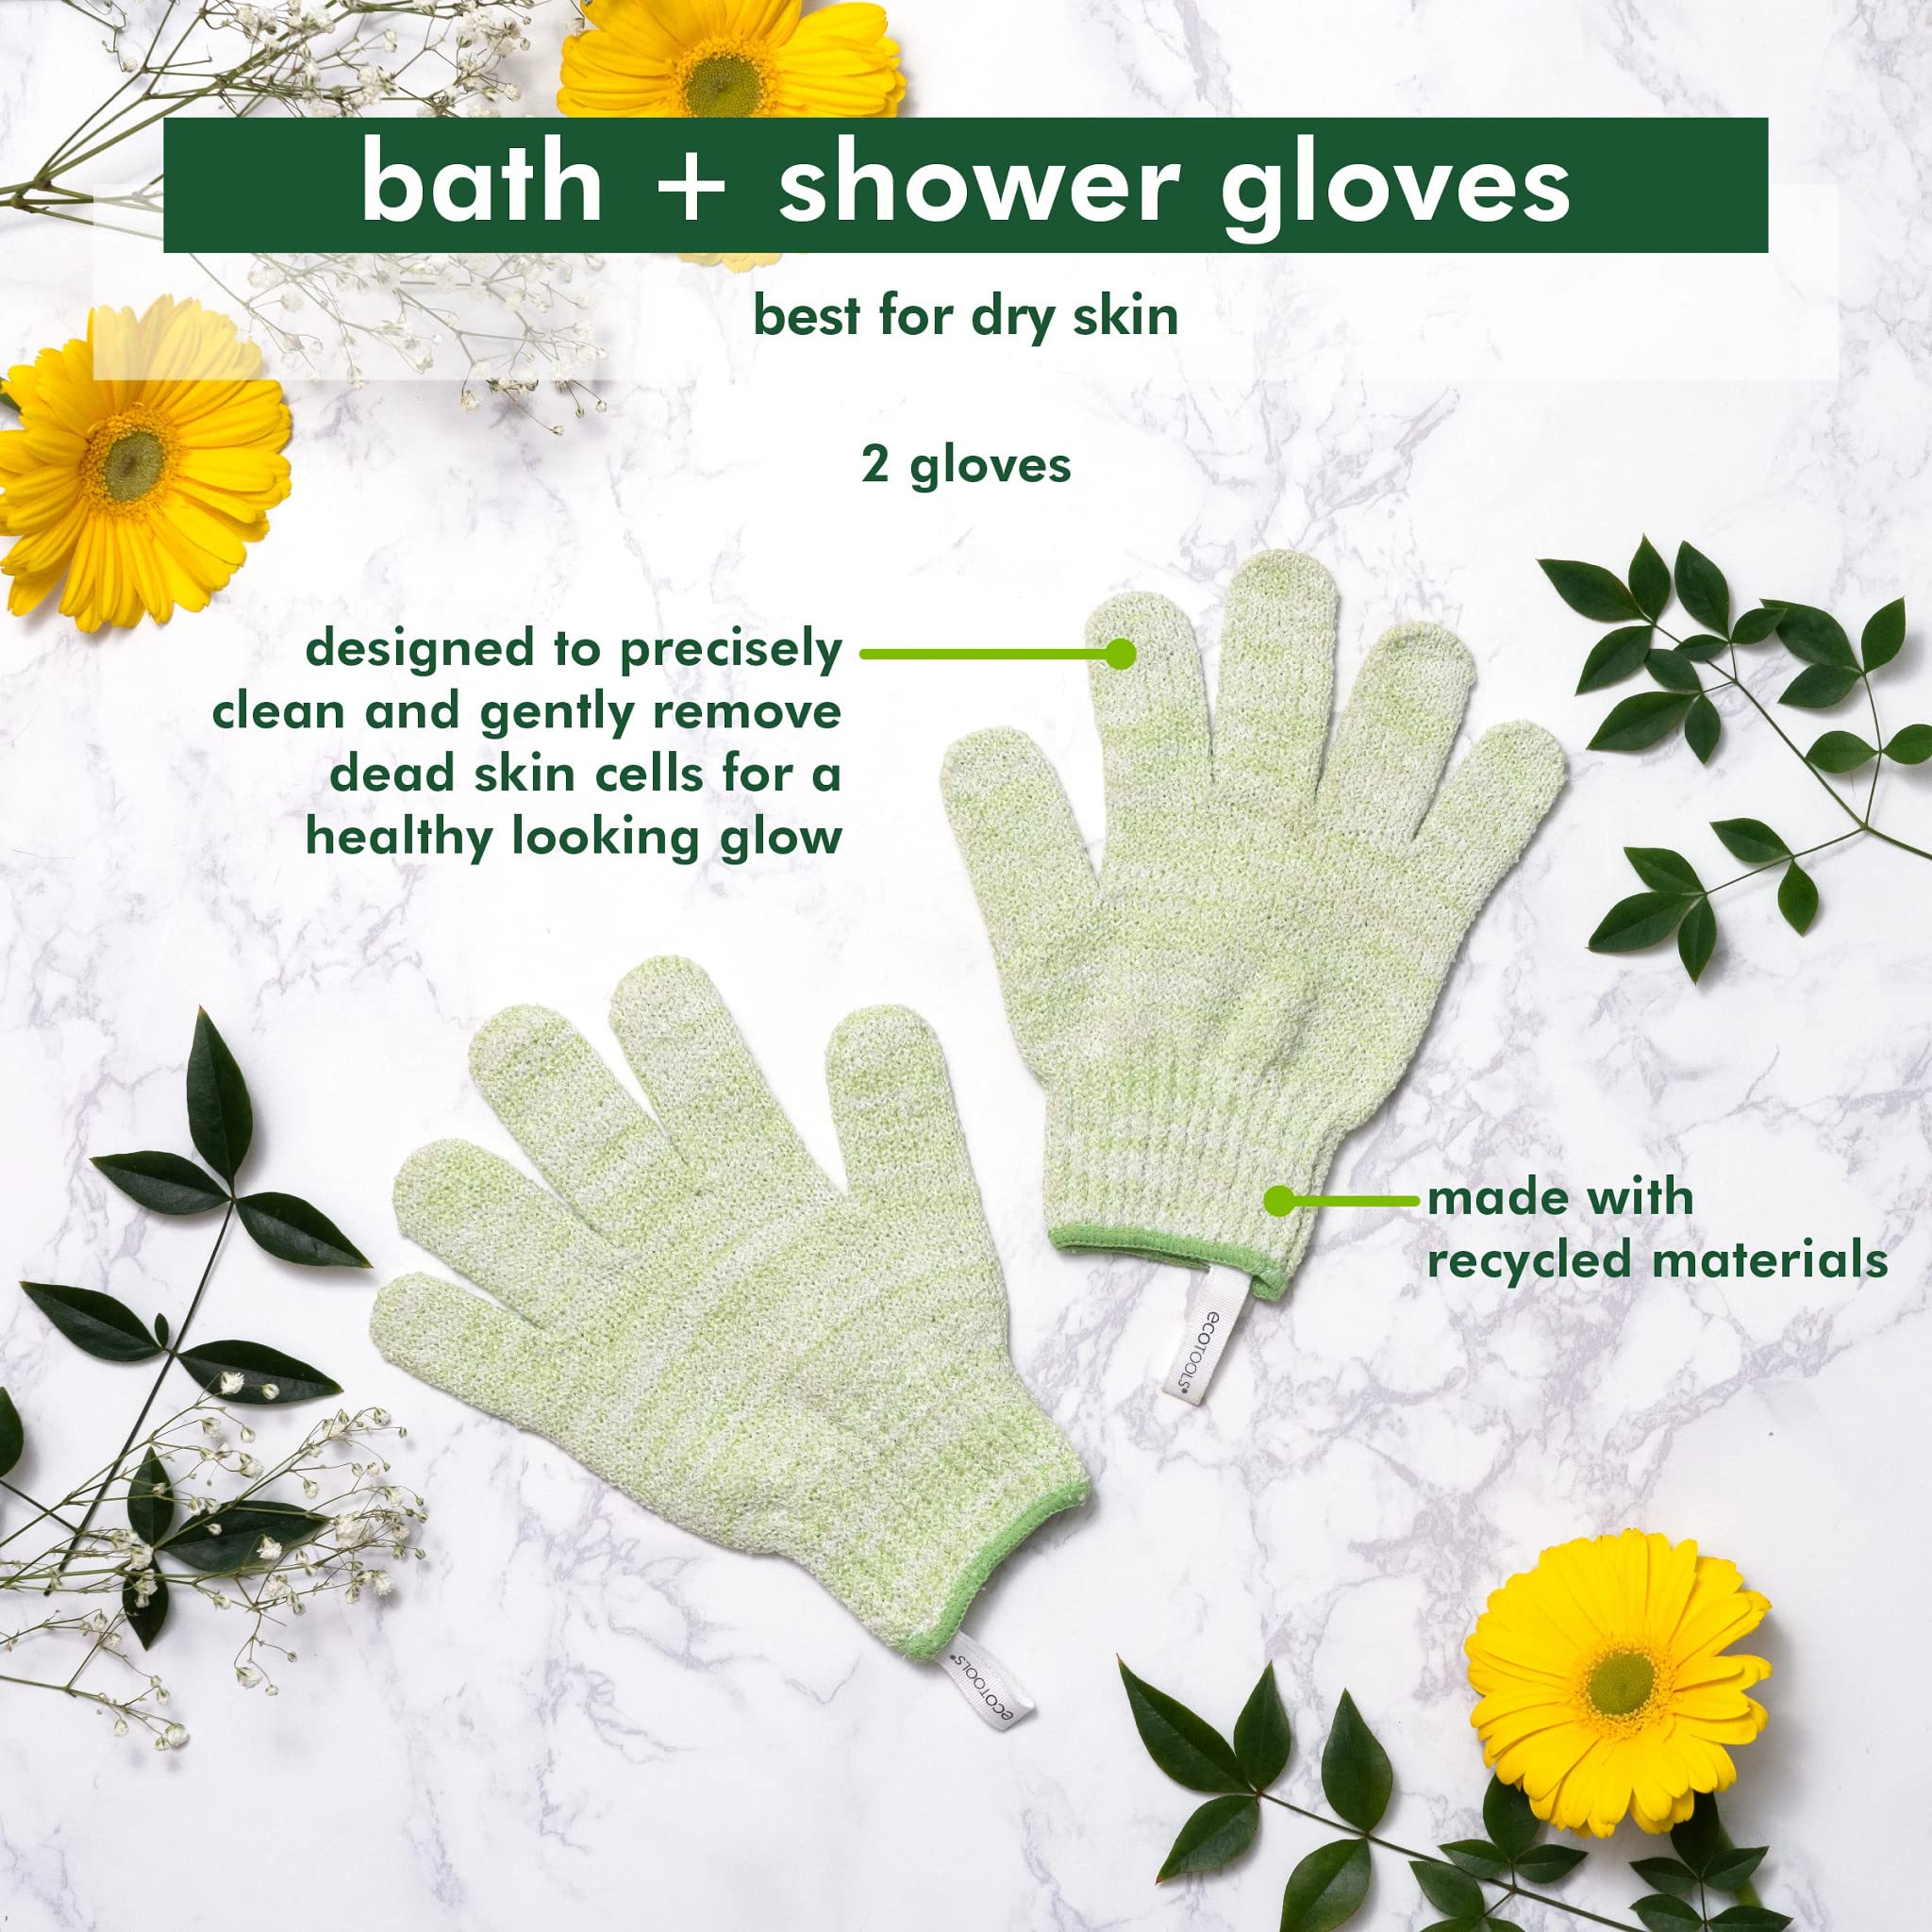 EcoTools Bath & Shower Gloves, Recycled Netting, Exfoliating, Gentle Cleansing for Whole Body, Fits All Hands, Green, 1 Pair